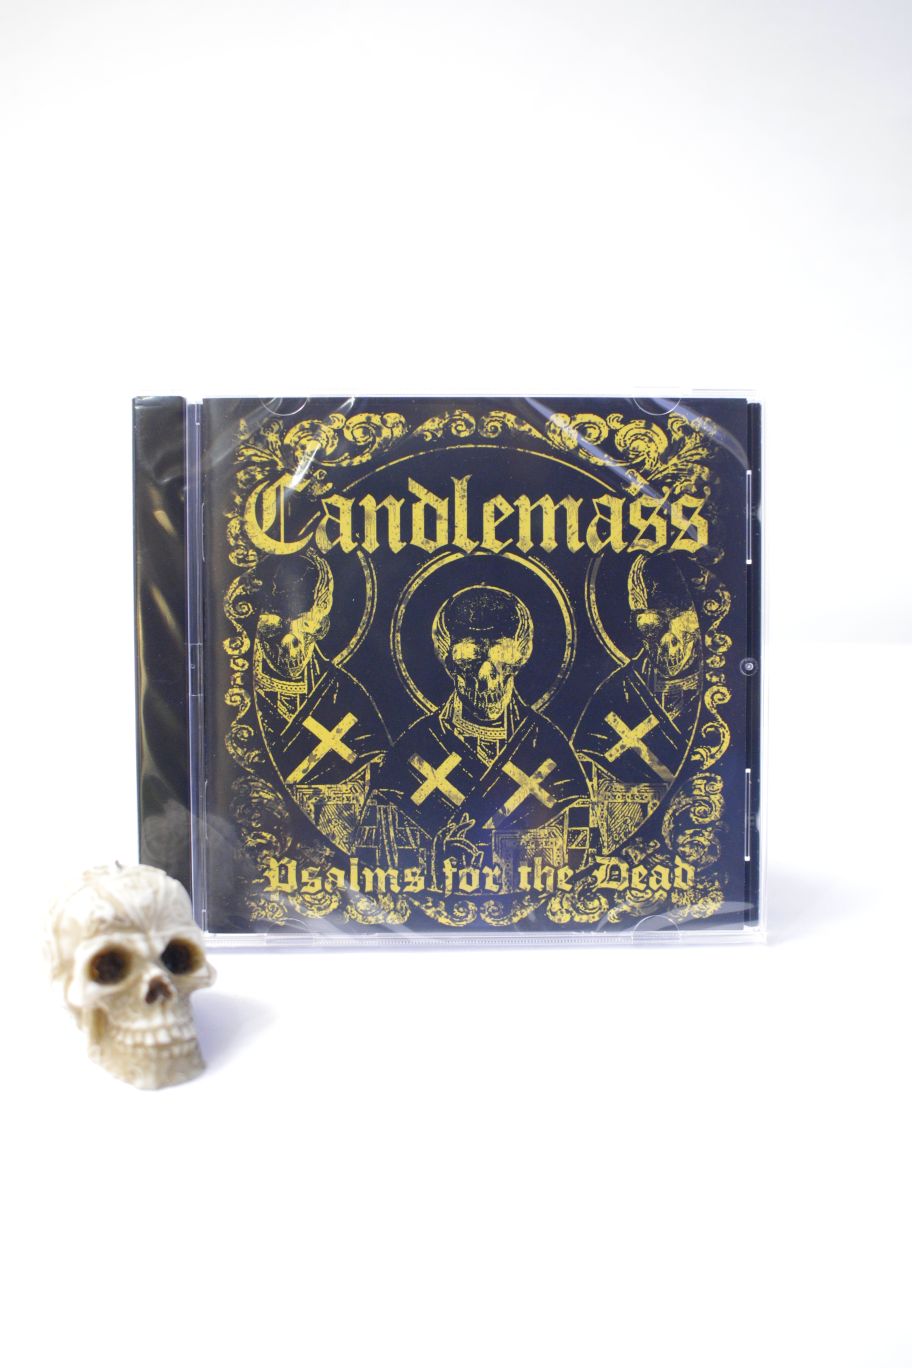 CD CANDLEMASS PSALMS FOR THE DEAD